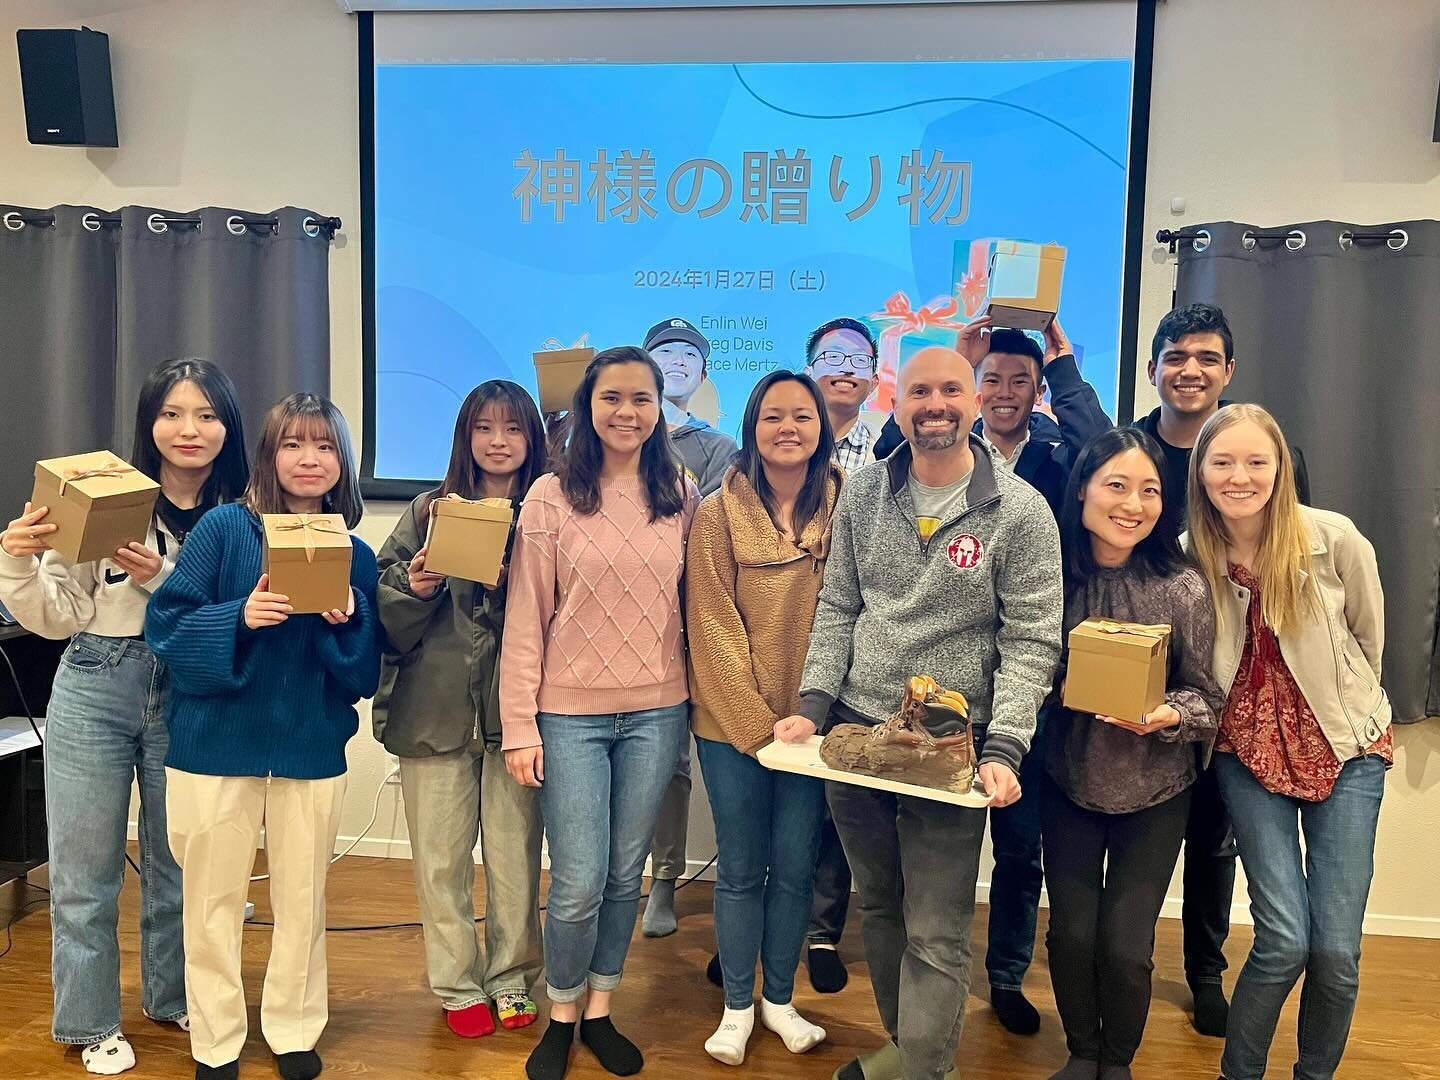 We had a great time at the Japanese event called &ldquo;God&rsquo;s Gift!&rdquo; 😊We started the day with a yummy salmon lunch 😋 it was a packed day as Rin shared her story, and we learned what the GOSPEL means, evidence for God, and the history be